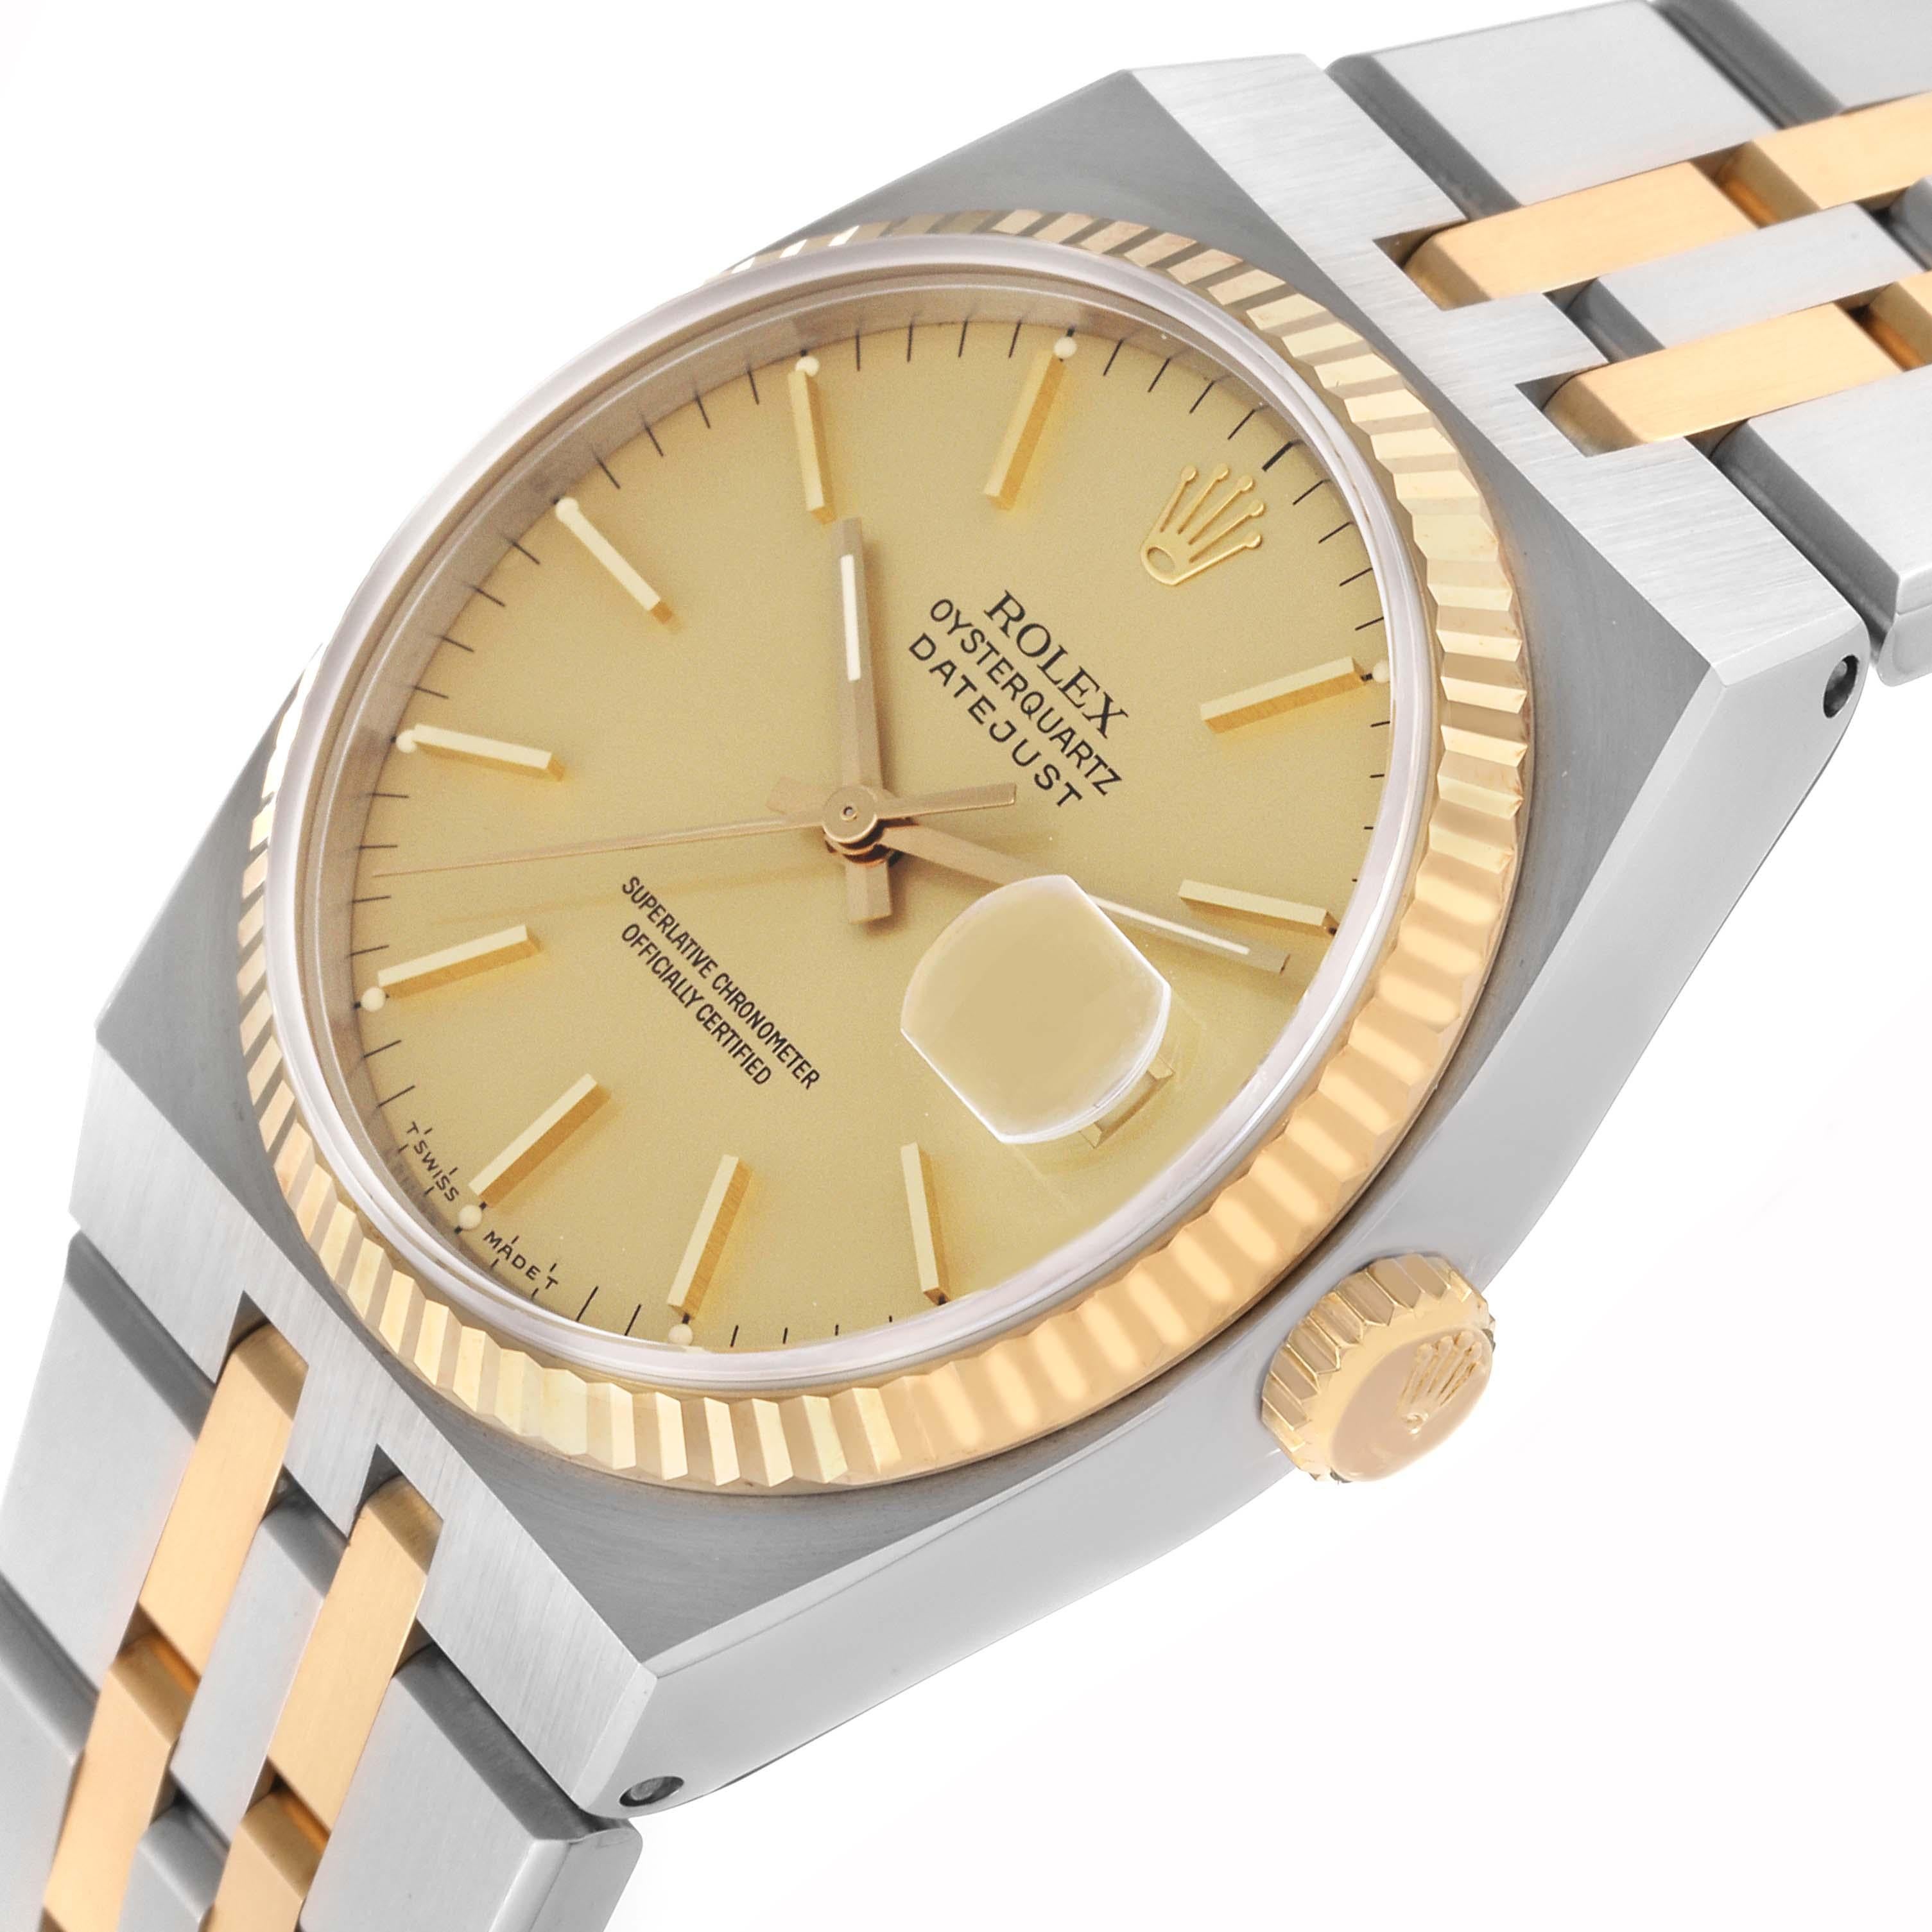 Rolex Oysterquartz Datejust Steel Yellow Gold Mens Watch 17013 For Sale 3